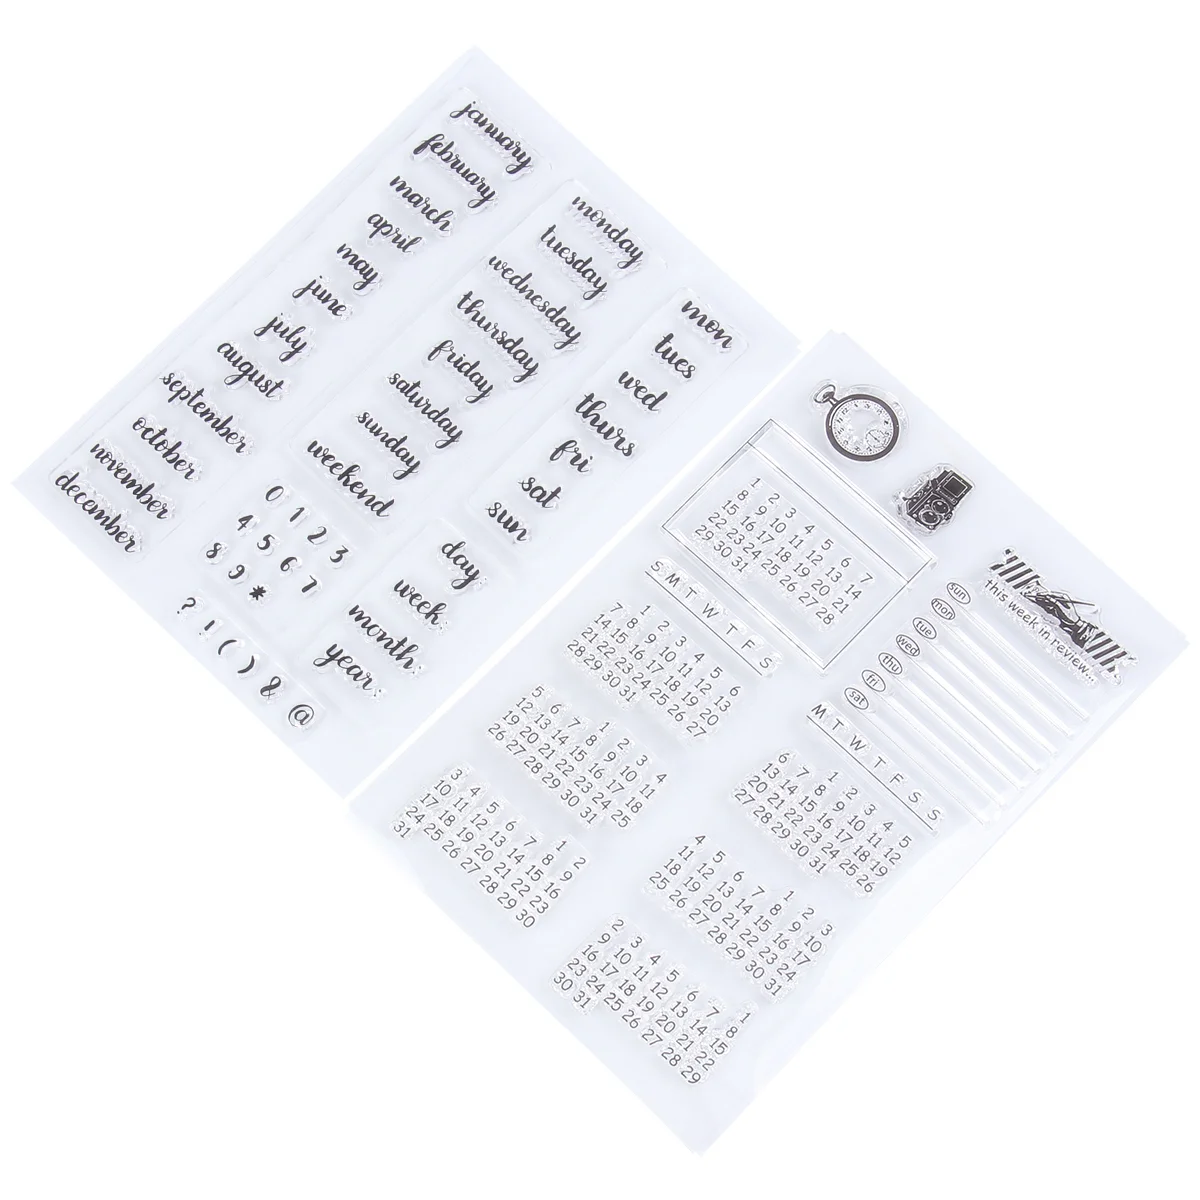 

2 Silicone Clear Stamps Seal Stamps Week Month Calendar Stamps for Photo Scrapbooking Making Album Book